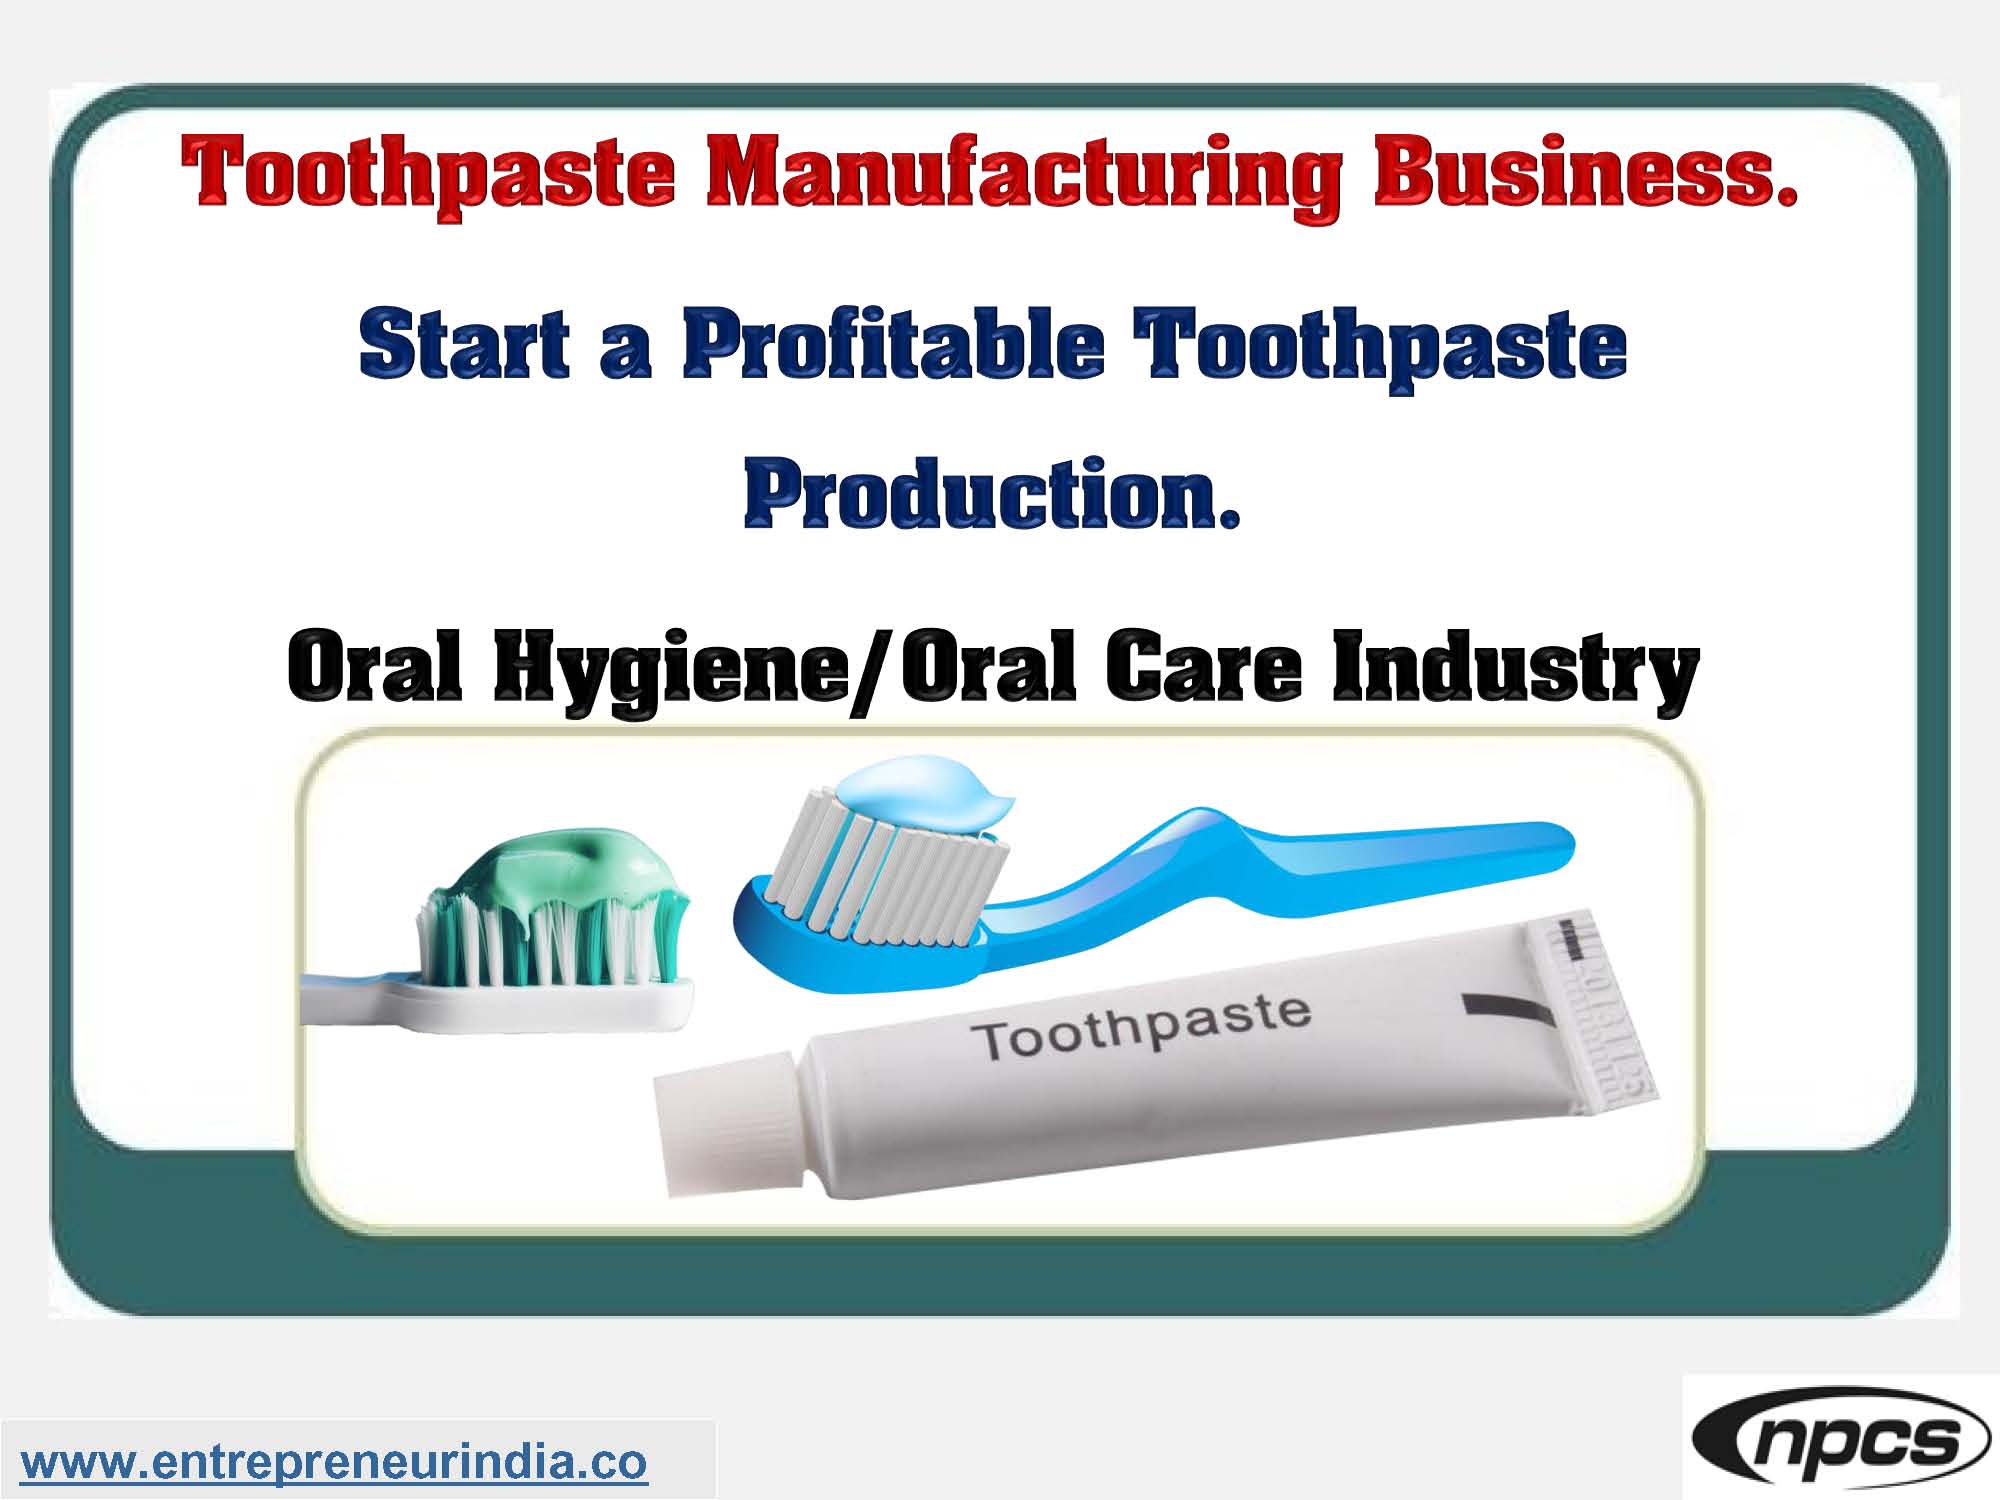 Toothpaste Manufacturing Business